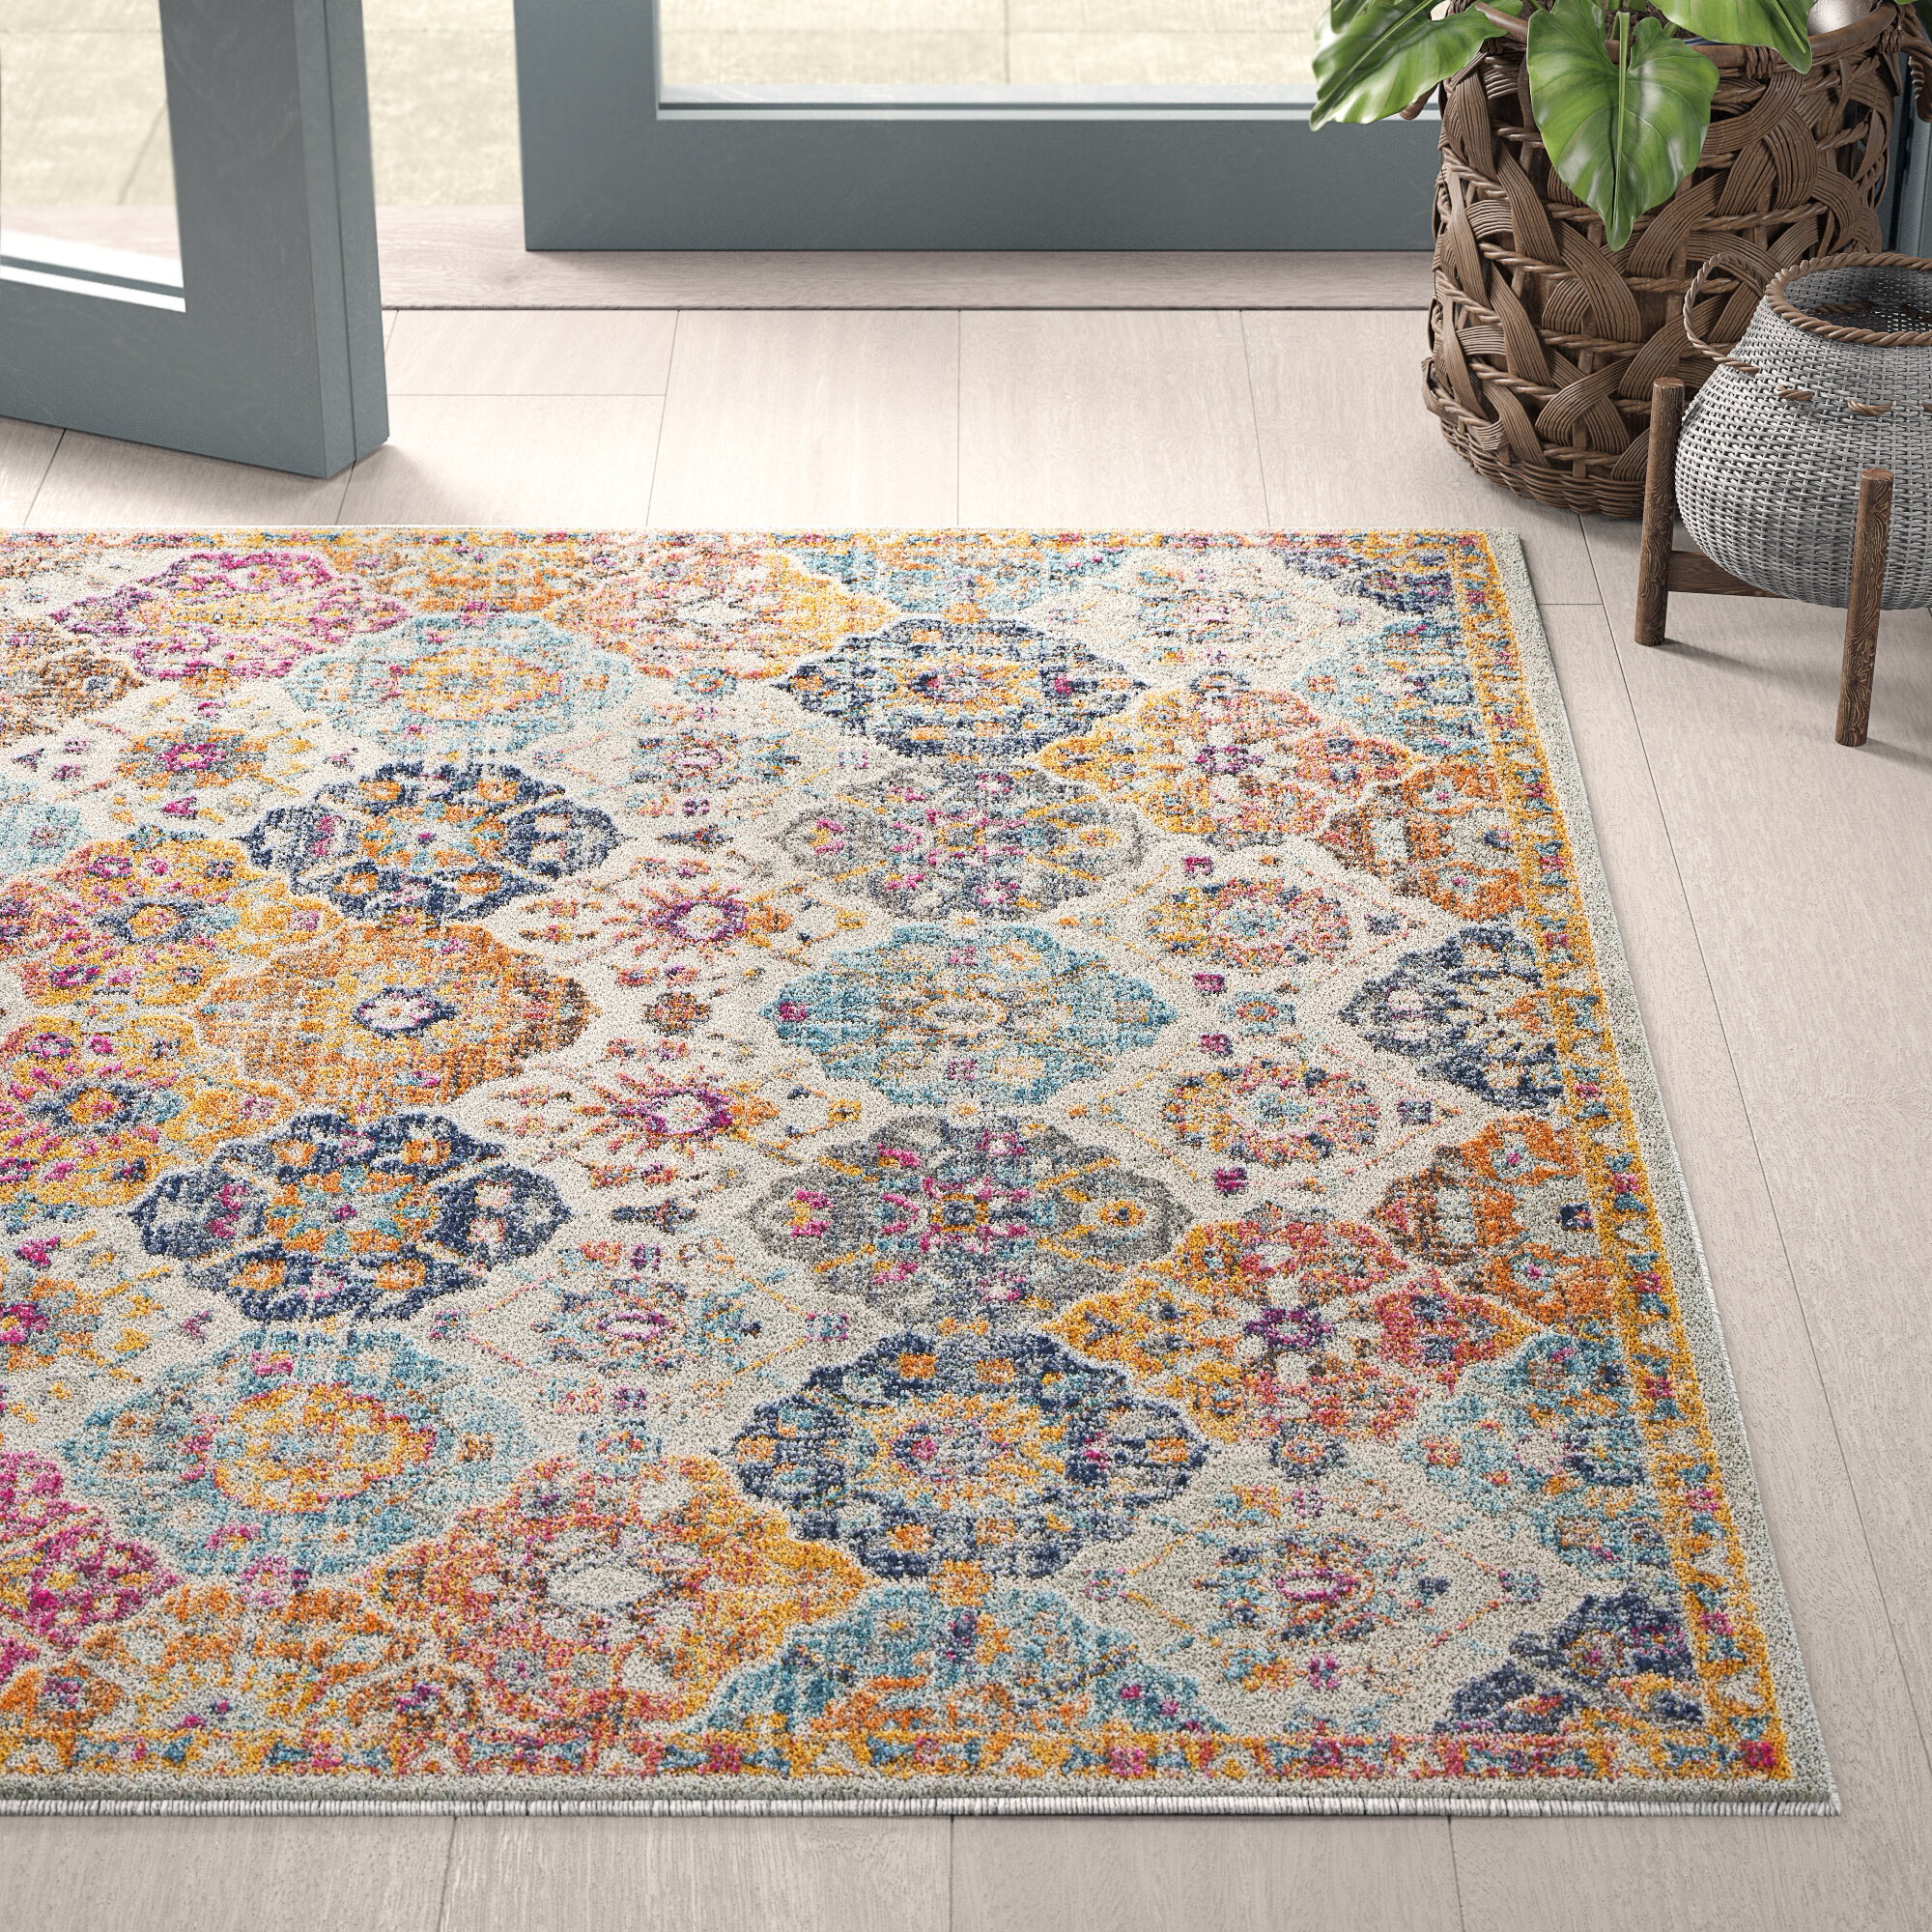 Modern Area Rug Oriental Style Rugs Bedroom Living Room Traditional Carpet Mats 